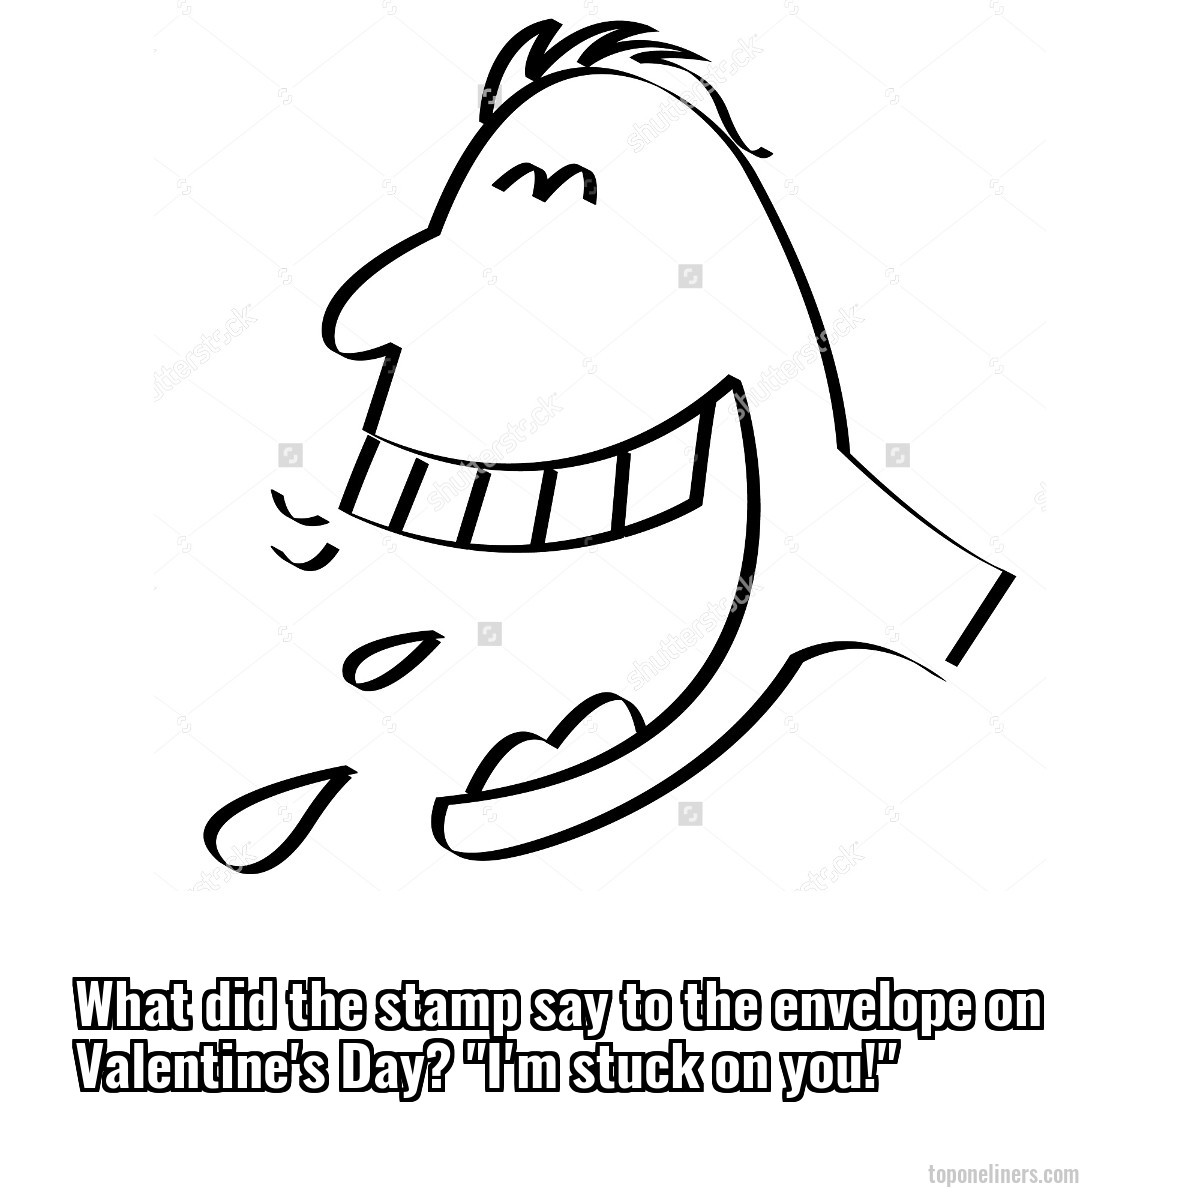 What did the stamp say to the envelope on Valentine's Day? "I'm stuck on you!"